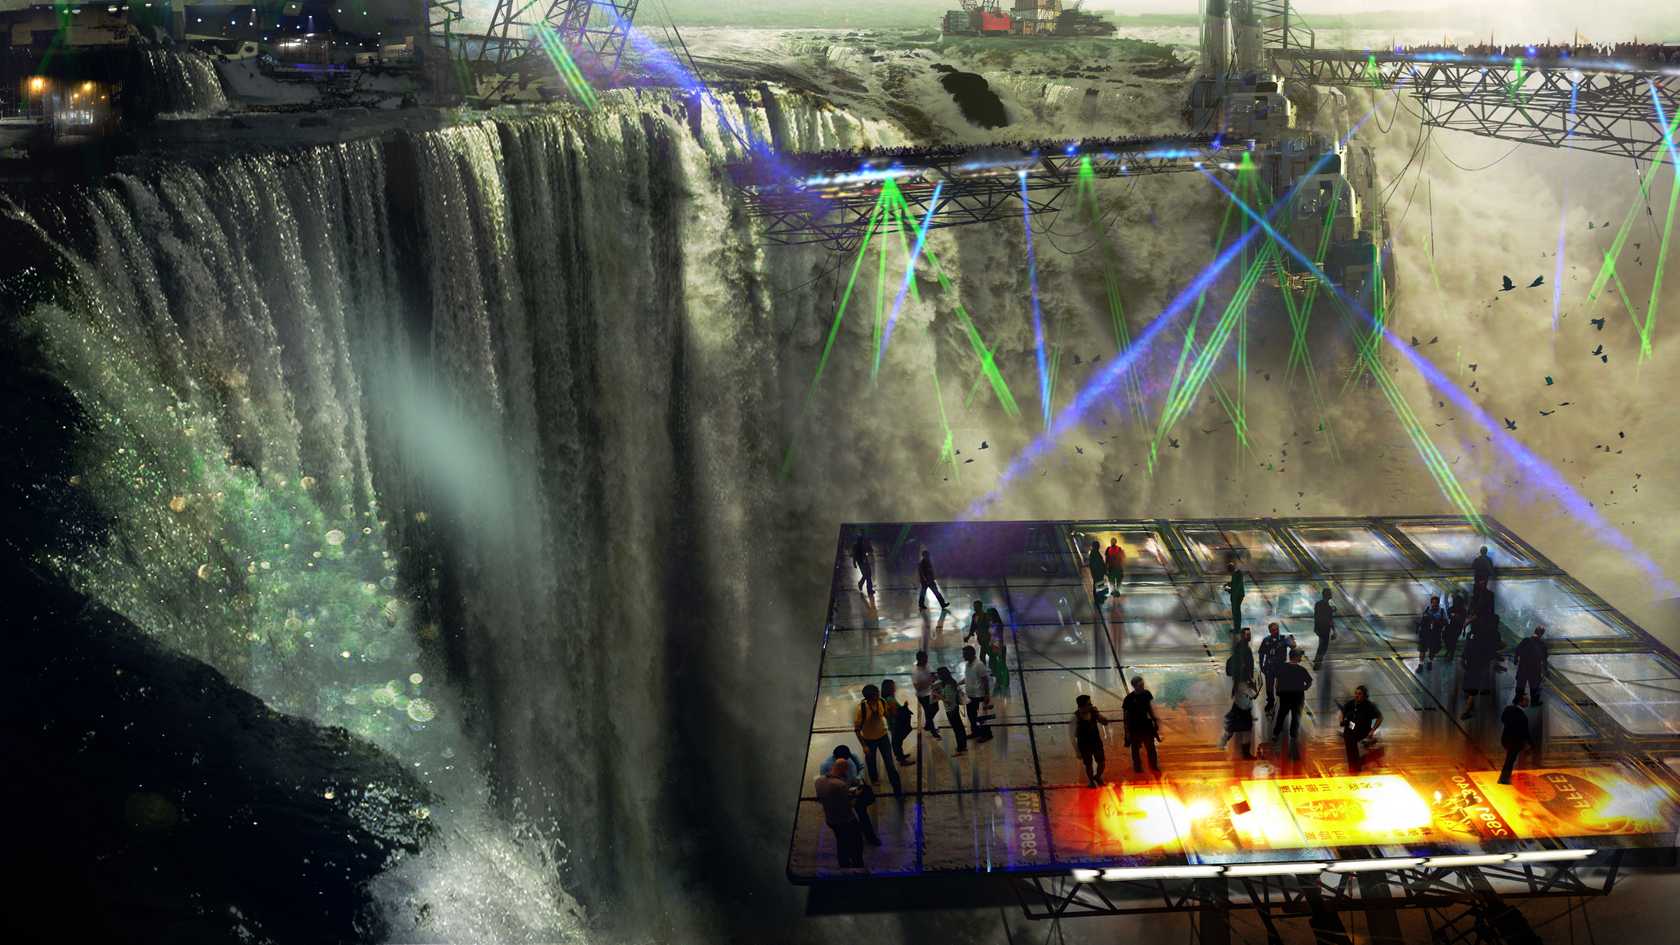 People walk on a glass-floored platform raised above an enormous waterfall that would put Niagra to shame. In the background, metal trusswork bridges cross the chasm, with green and purple lasers illuminating the falls below.